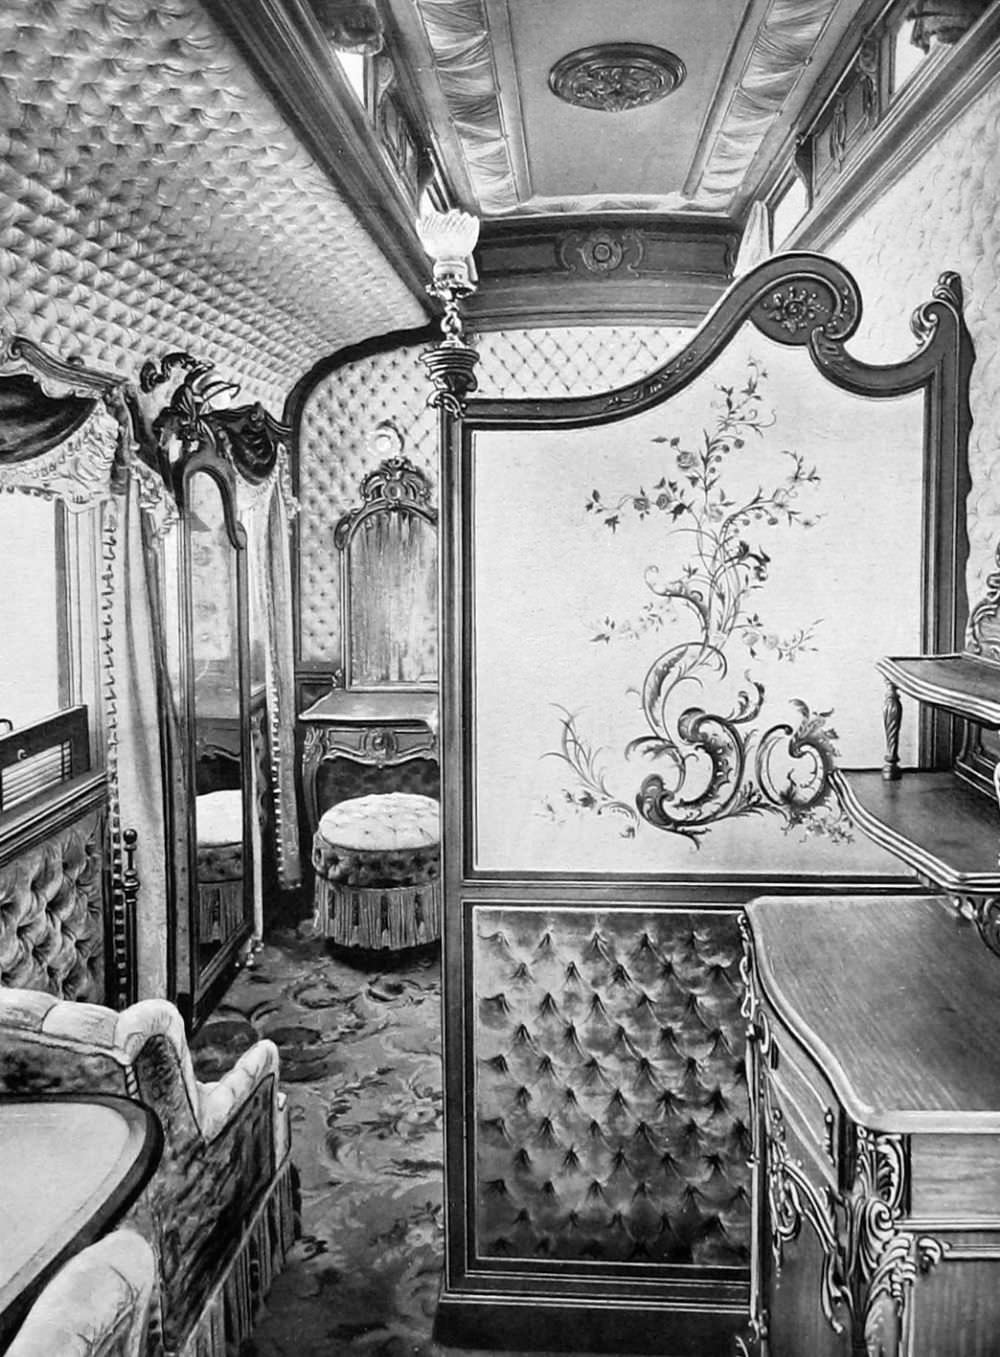 The cars painted in dark blue and decorated with gilding looked beautiful. Detail of interior of the Imperial train.